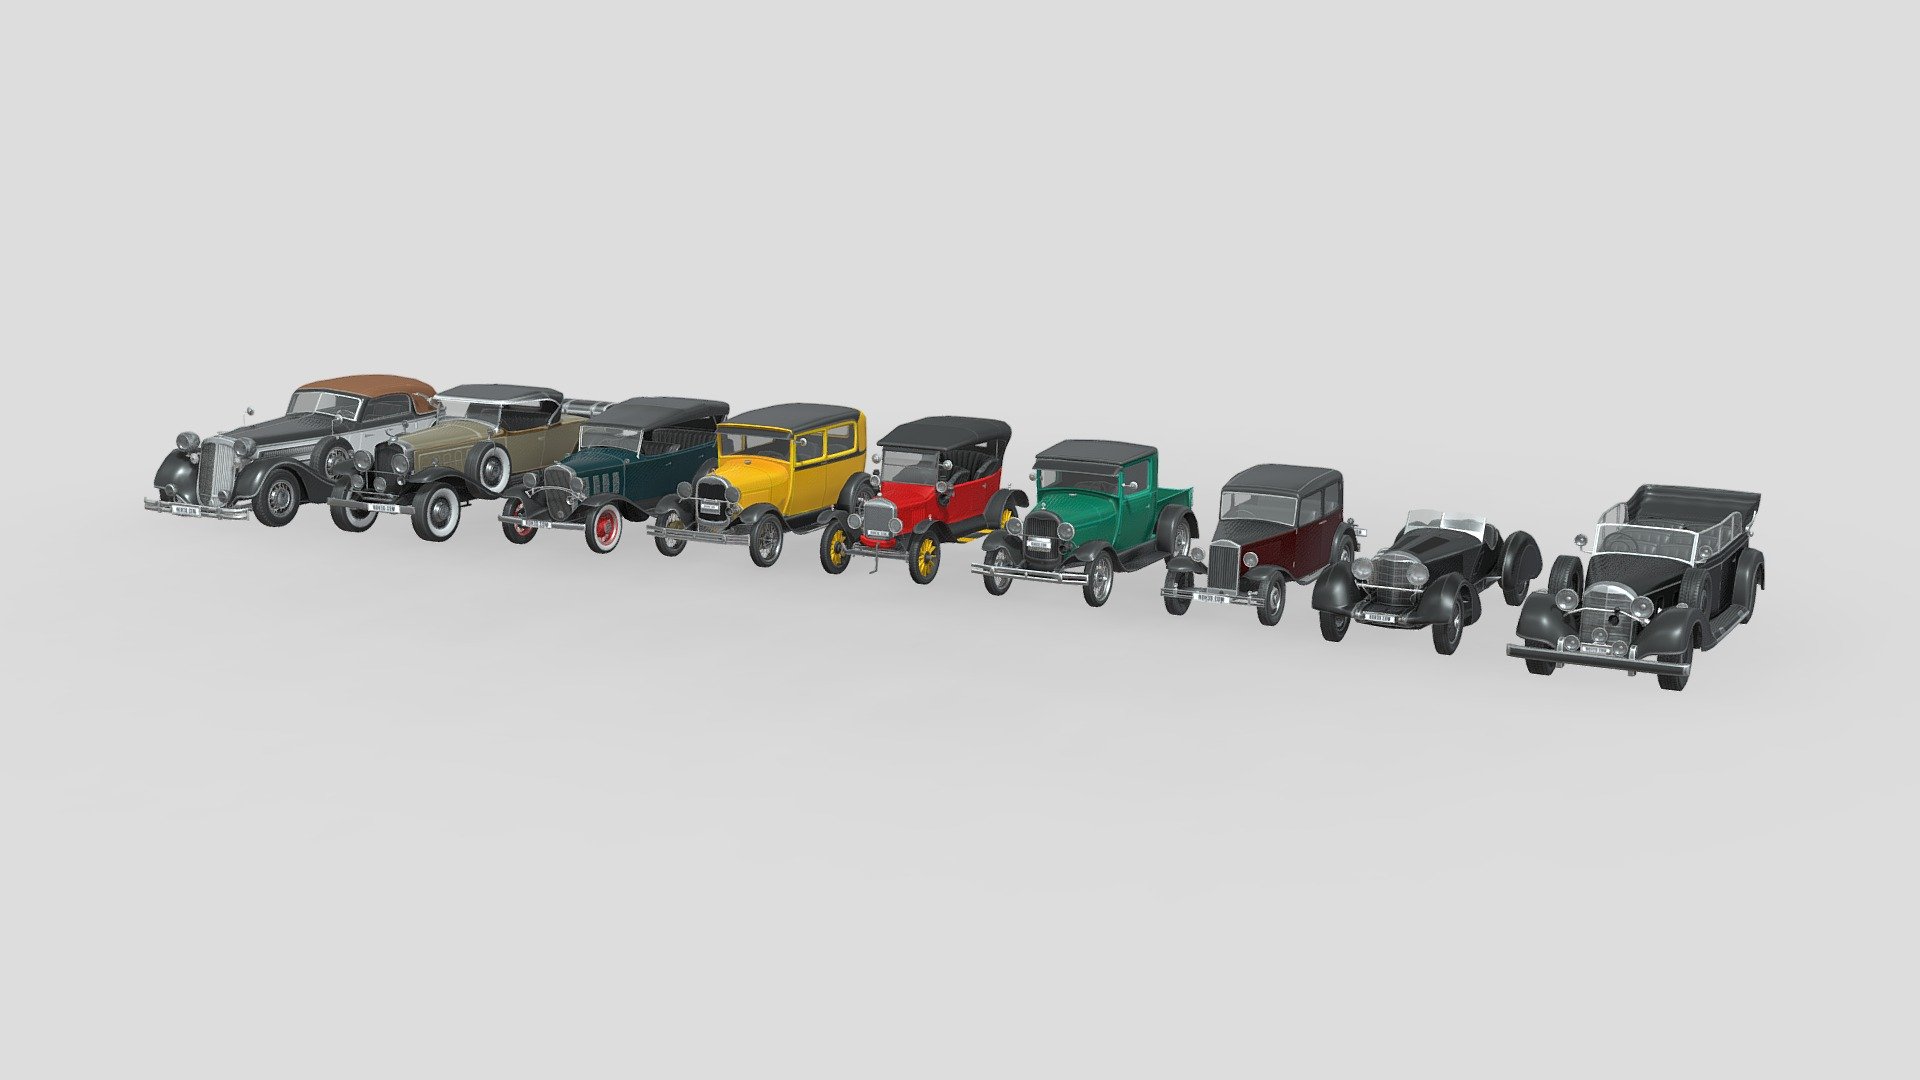 This models pack contain 9 different cars, with nice and clean geometry.

Features : 





Low poly cars, each cars only have about 7k polygons.




It’s included PSD file, so you can easily change the color (Using Photoshop). 




Nice detail, thanks to the baked-textures in 4K size.



Cars included in this pack: 




Horch A Sport Cabriolet 1937

Cadillac V16 Roadster 1933

Chevrolet Confederate 1932

Ford Model A Tudor 1929

Ford Model T 1929 

Ford Model A Cab 1928

Lancia Augusta 1933

Mercedes-Benz SSK Trossi Roadster 1930

Mercedes-Benz 770K 1936

Buying this collection, you will save a large amount of money! - Low Poly Cars Collection 003 - 30s Cars - Buy Royalty Free 3D model by ROH3D 3d model